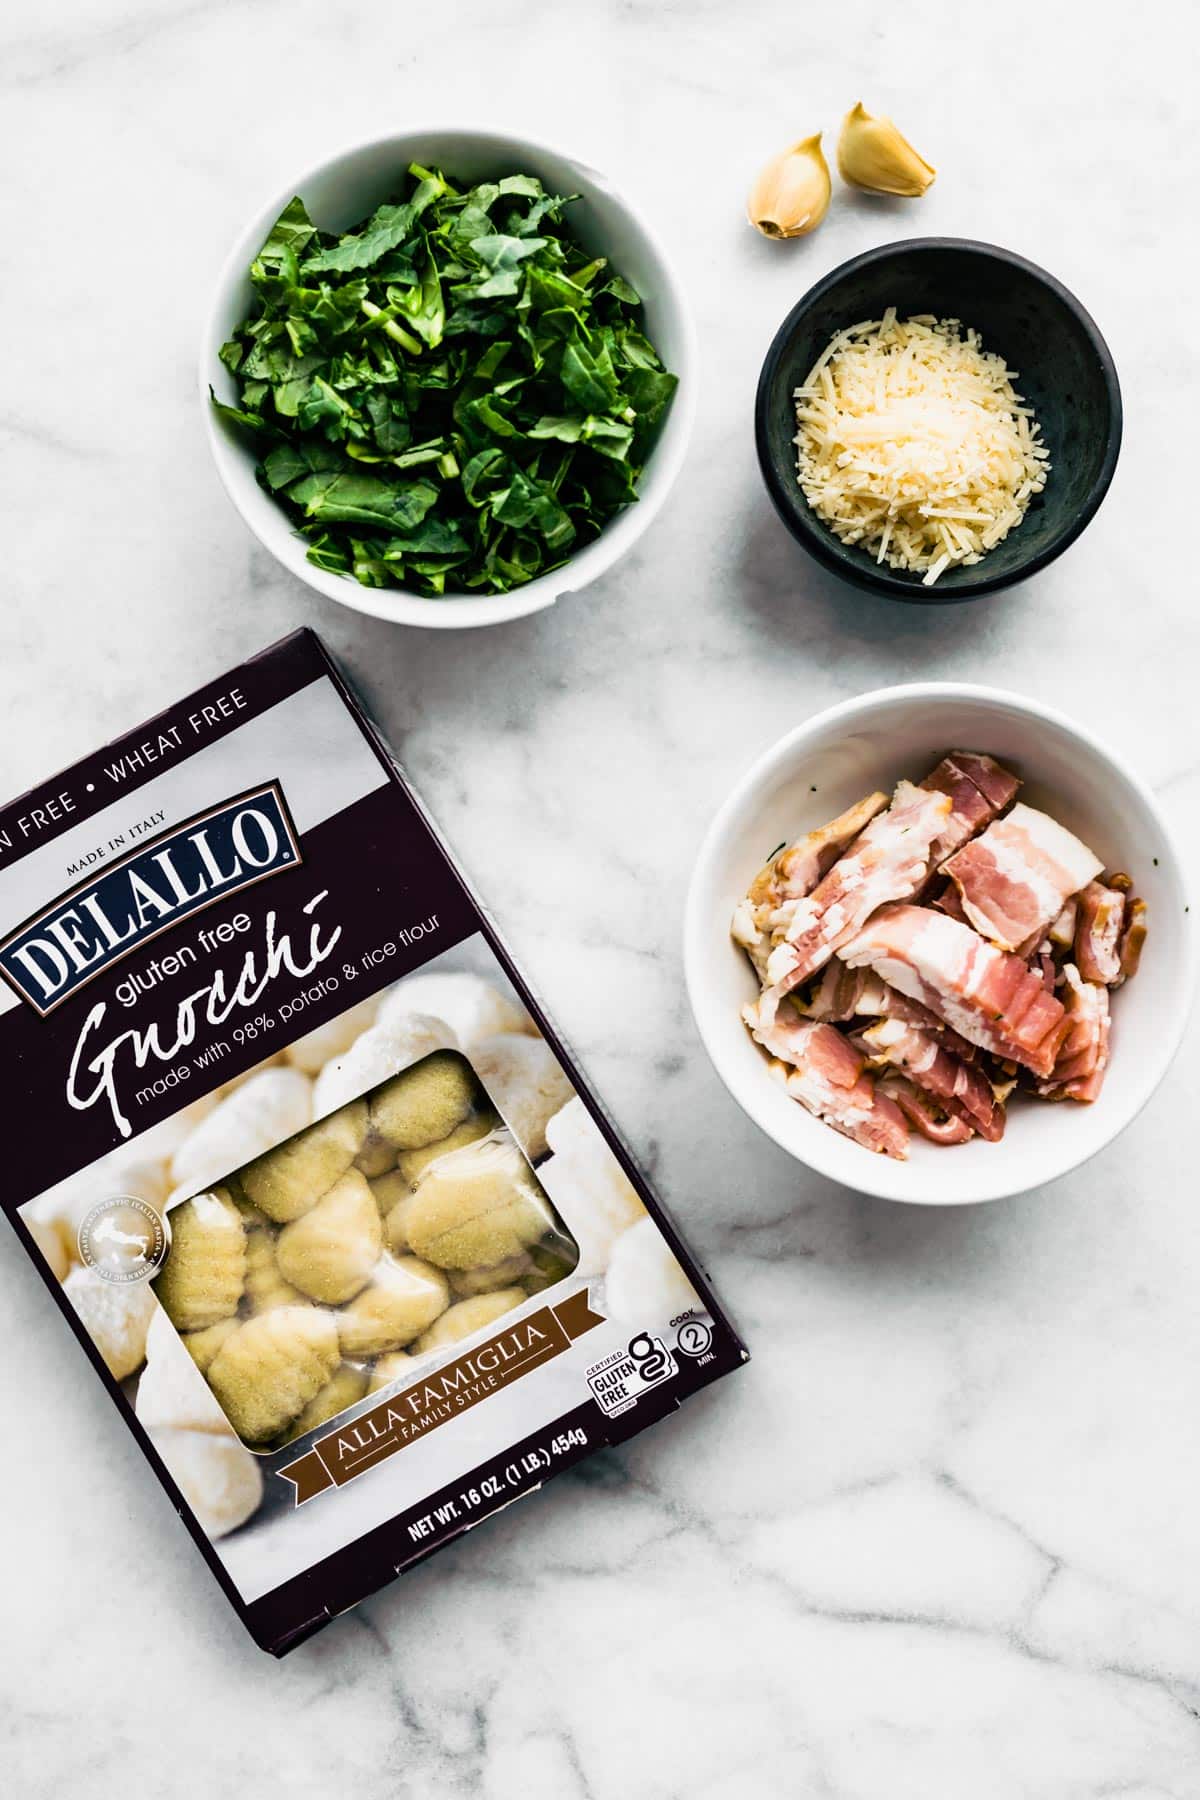 Overhead image of a bowl of kale, two garlic cloves, shredded Parmesan, chopped bacon, and a box of Delallo gluten-free gnocchi.